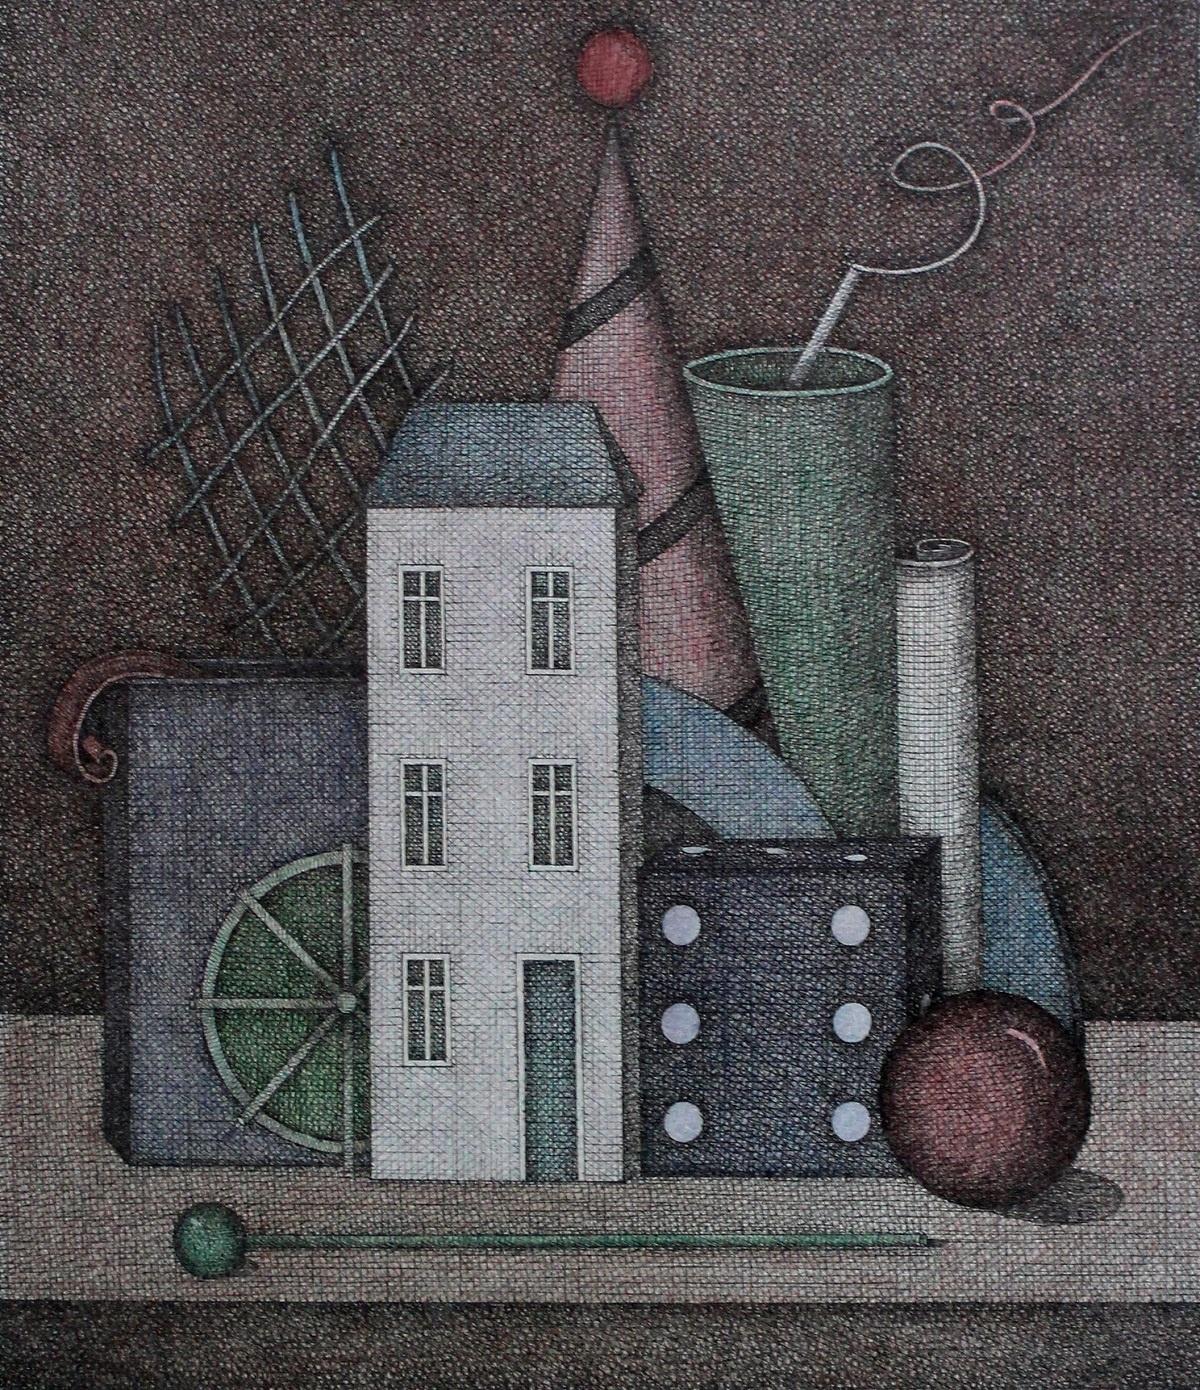 Still life with house - XXI century contemporary figurative print, Muted colors